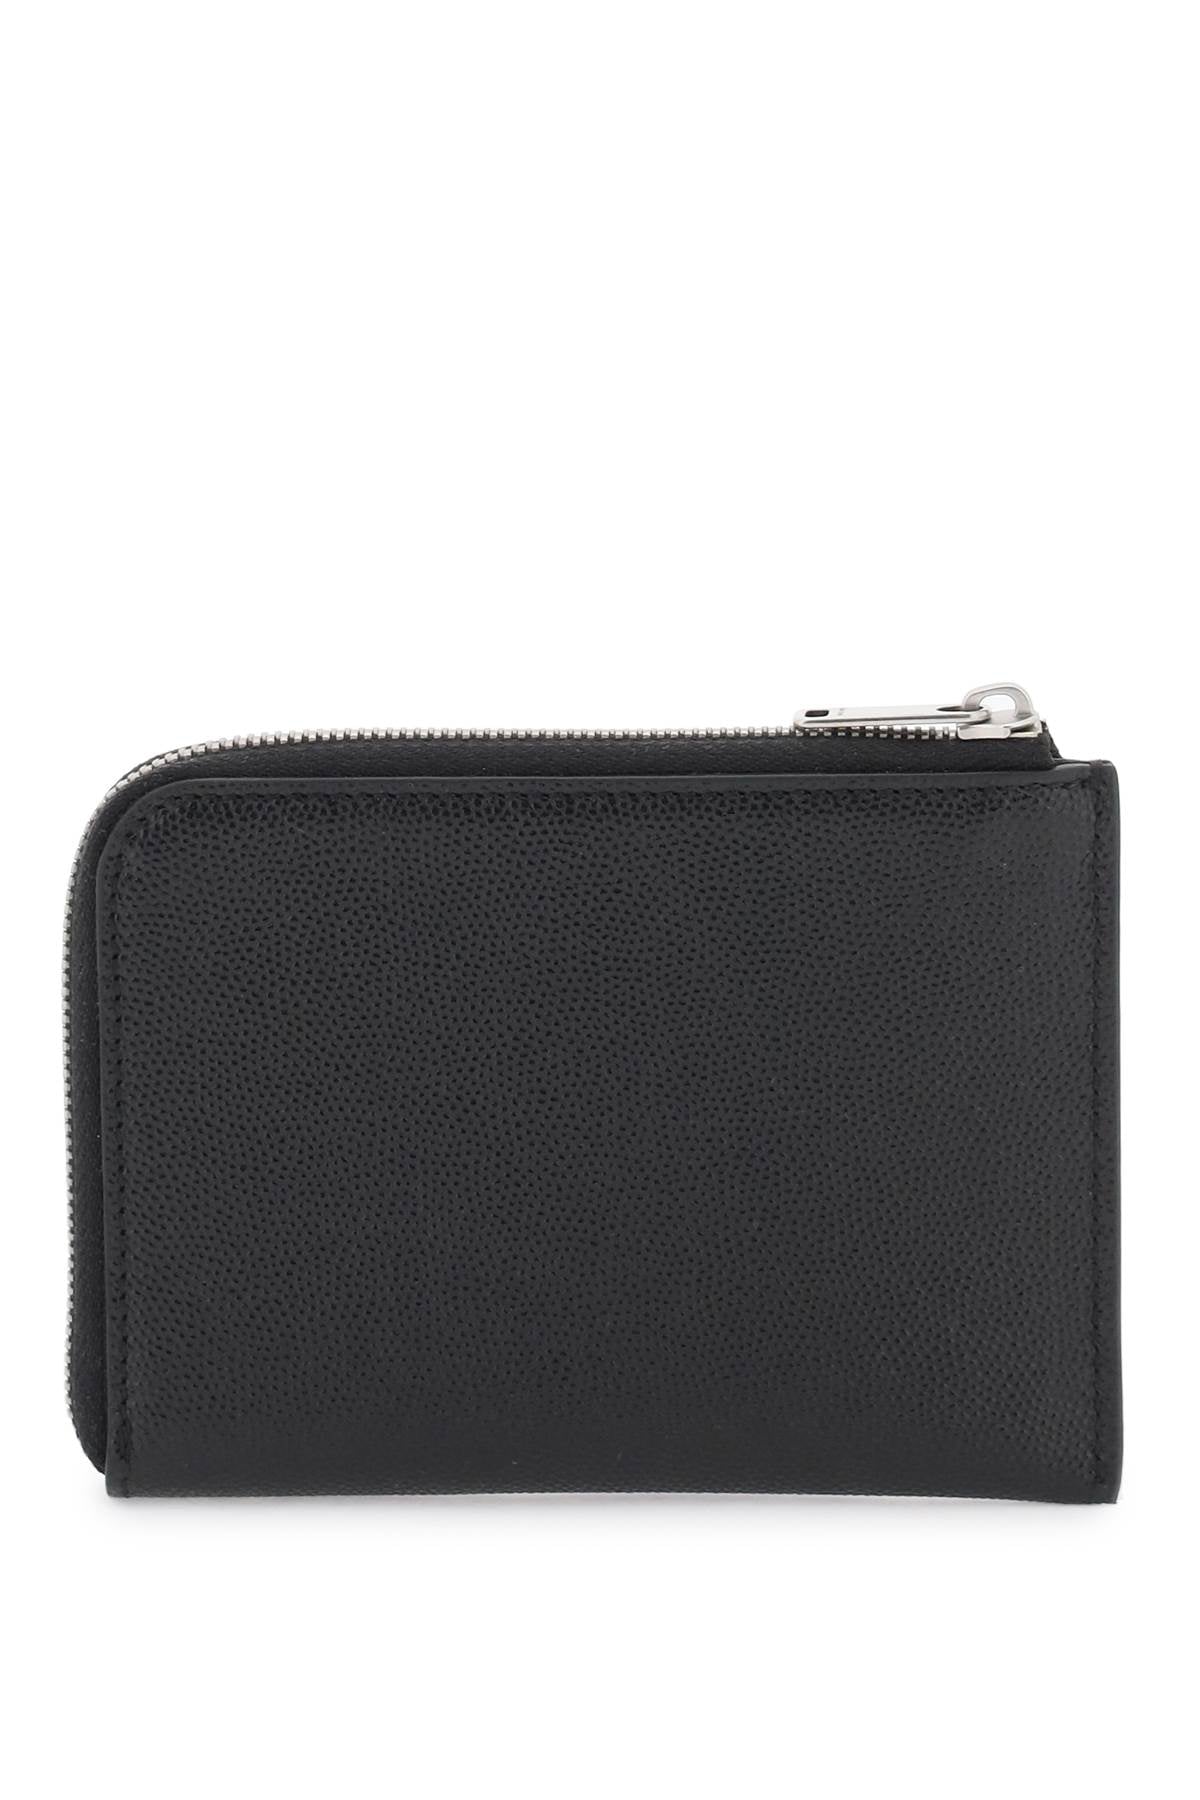 Palm Angels Palm angels mini pouch with pull-out cardholder